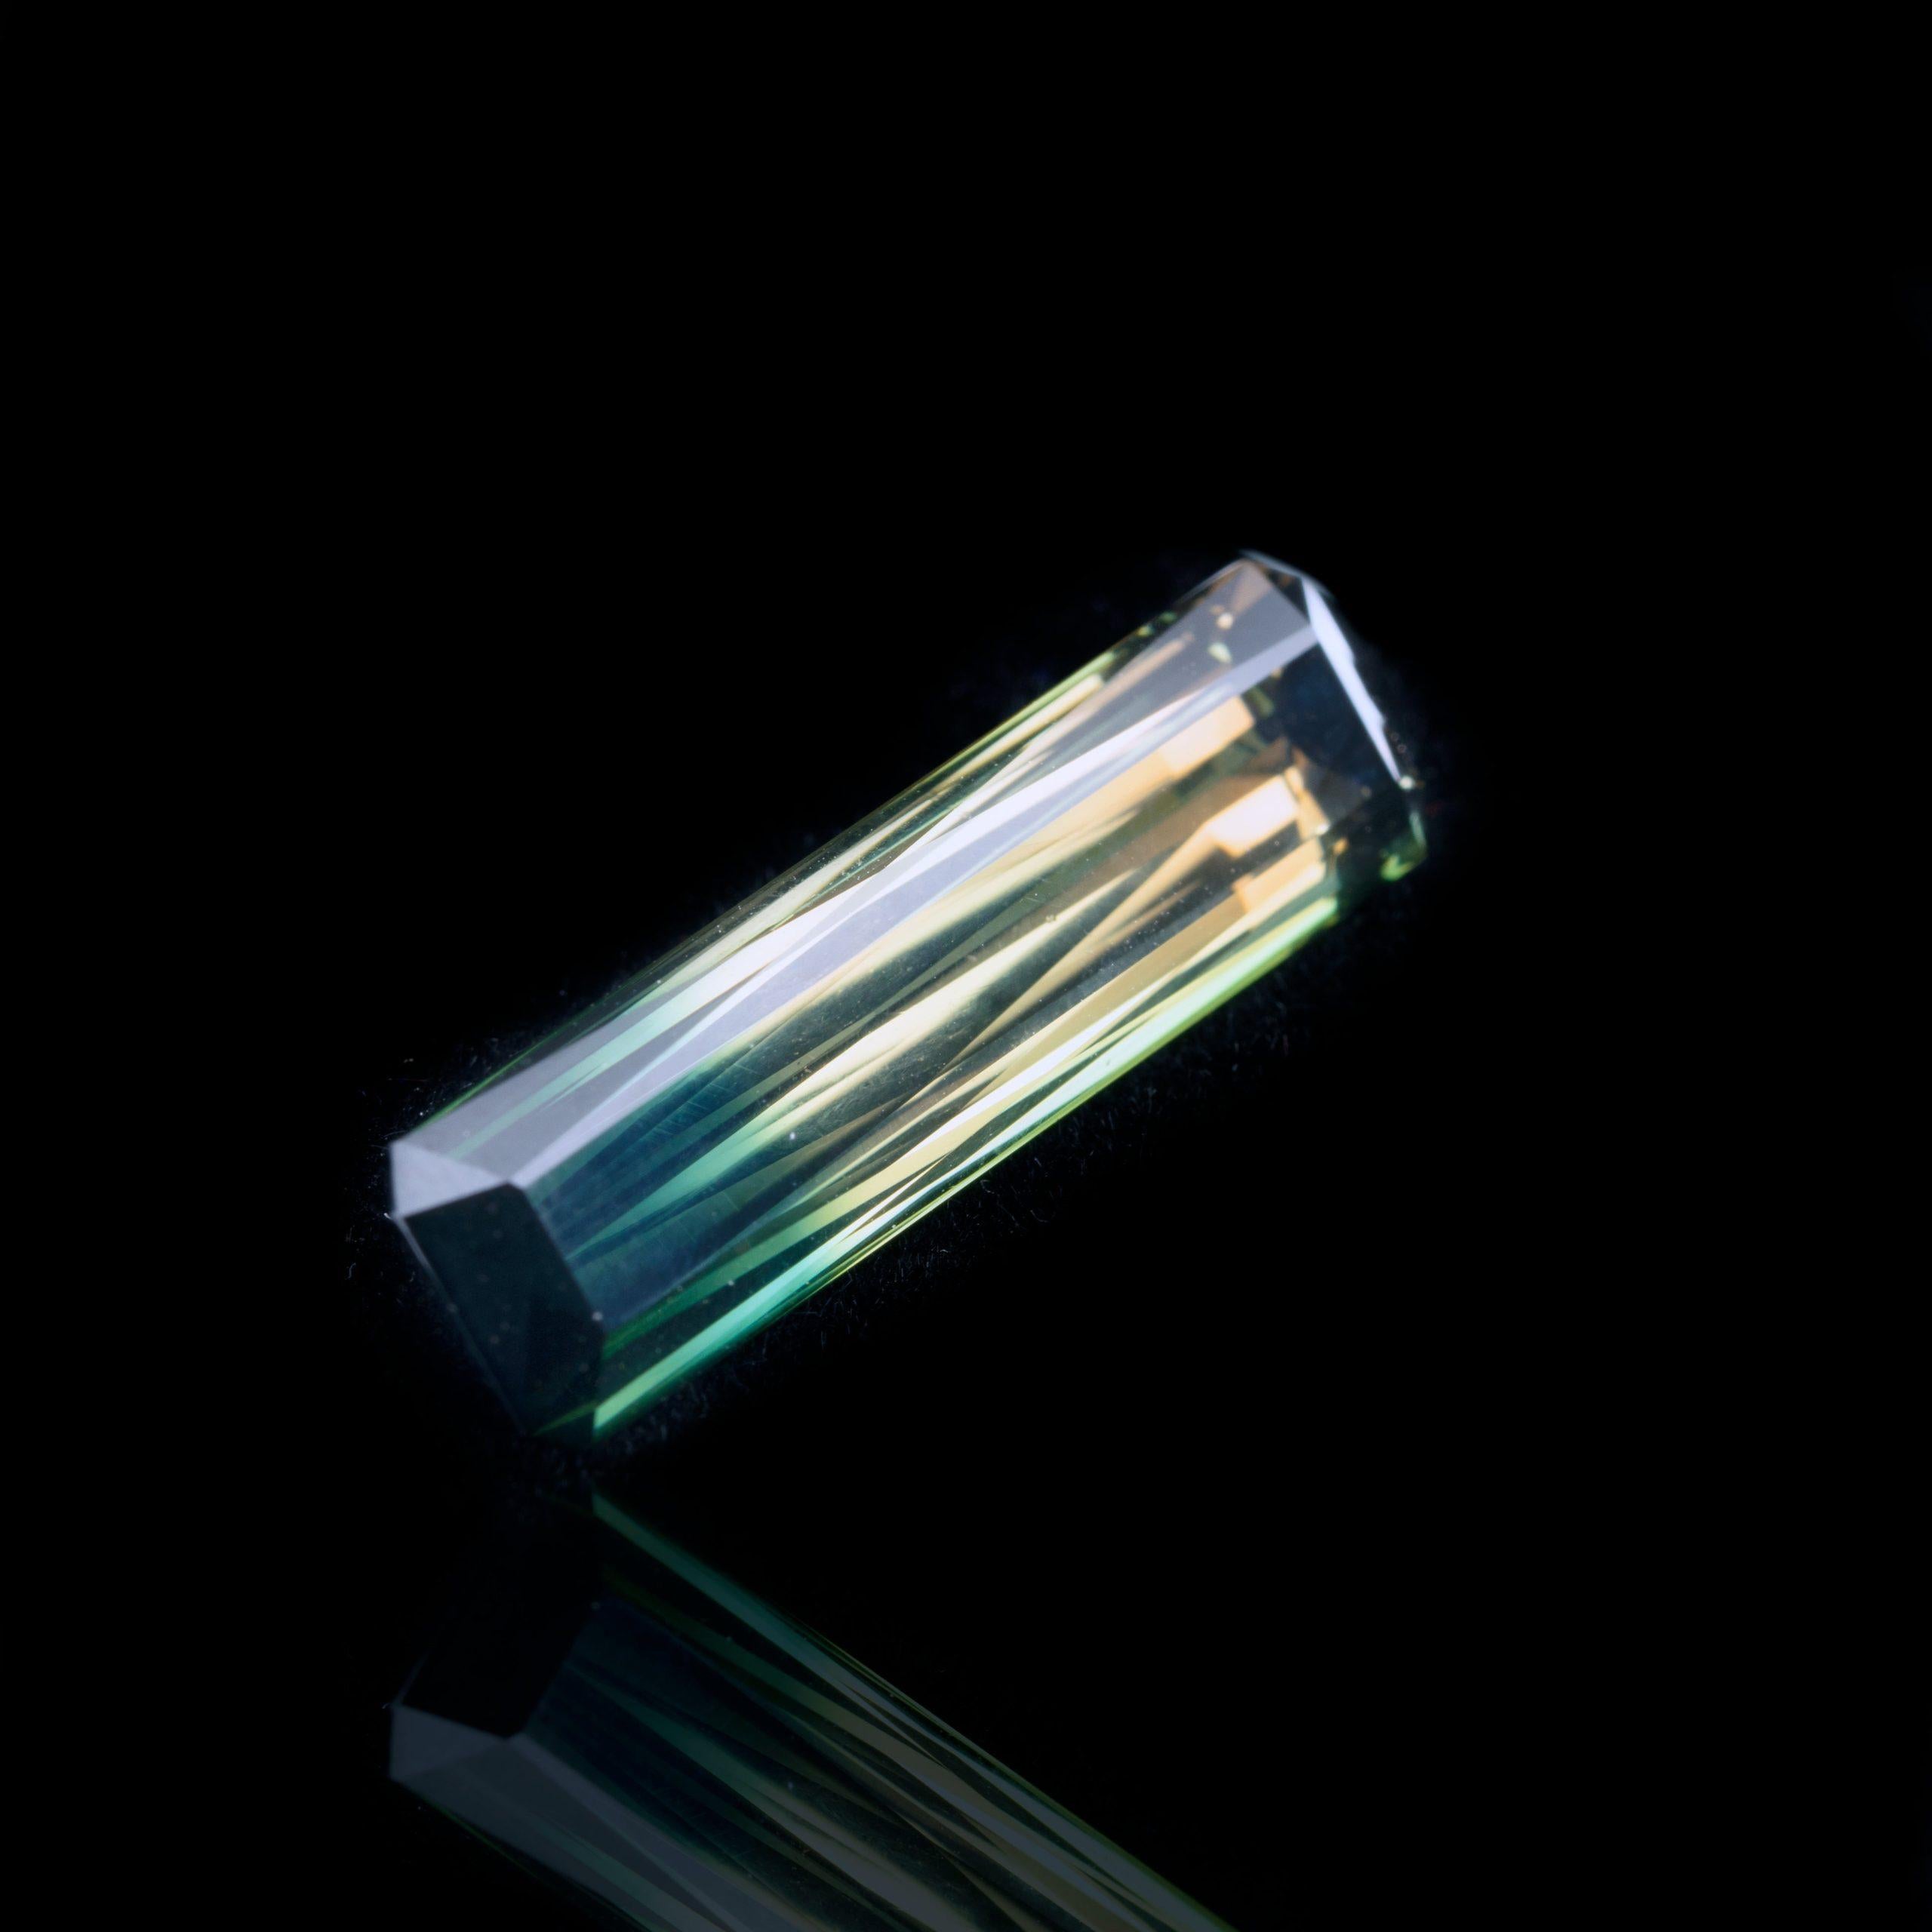 This flawless faceted and polished bicolor tourmaline specimen from Brazil features deep green to blue and then to a rare chrome-yellow hue and incredible, glasslike clarity. tricolor tourmaline is a variety of elbaite that is very hard to find,